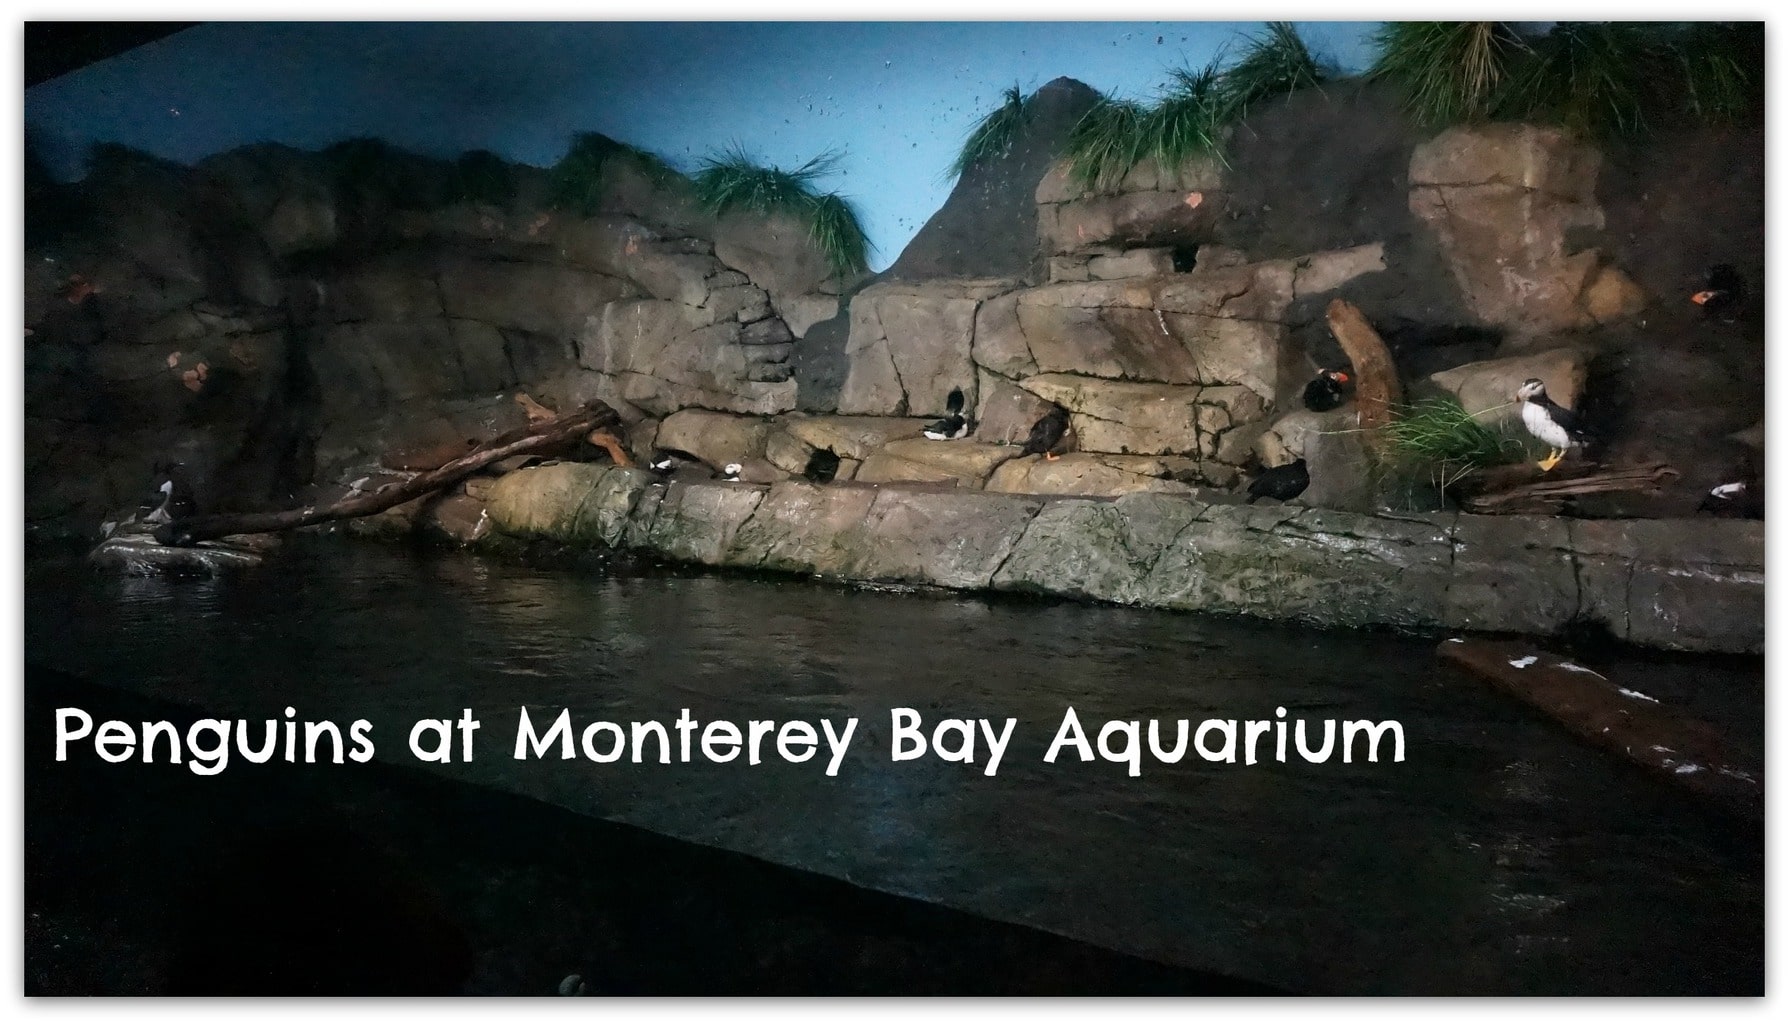 A few years ago we decided to take a California road trip with our girls. I love to travel internationally, but there is something special about a family road trip in the United States. There is so much to see right here in our beautiful country! This was the Monterey aquarium penguins.